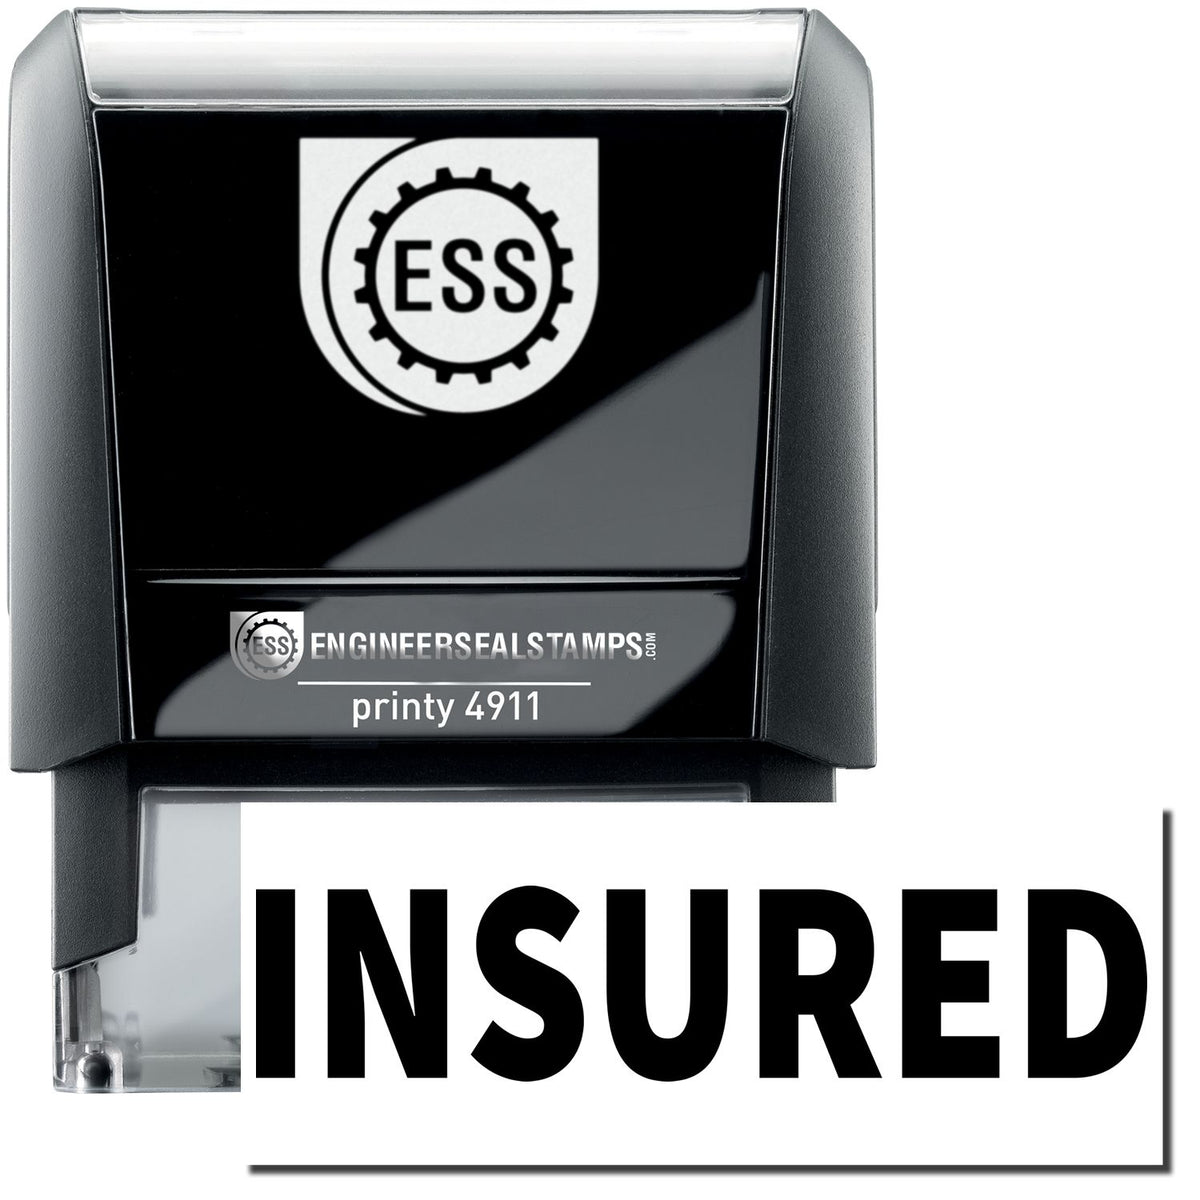 A self-inking stamp with a stamped image showing how the text &quot;INSURED&quot; is displayed after stamping.